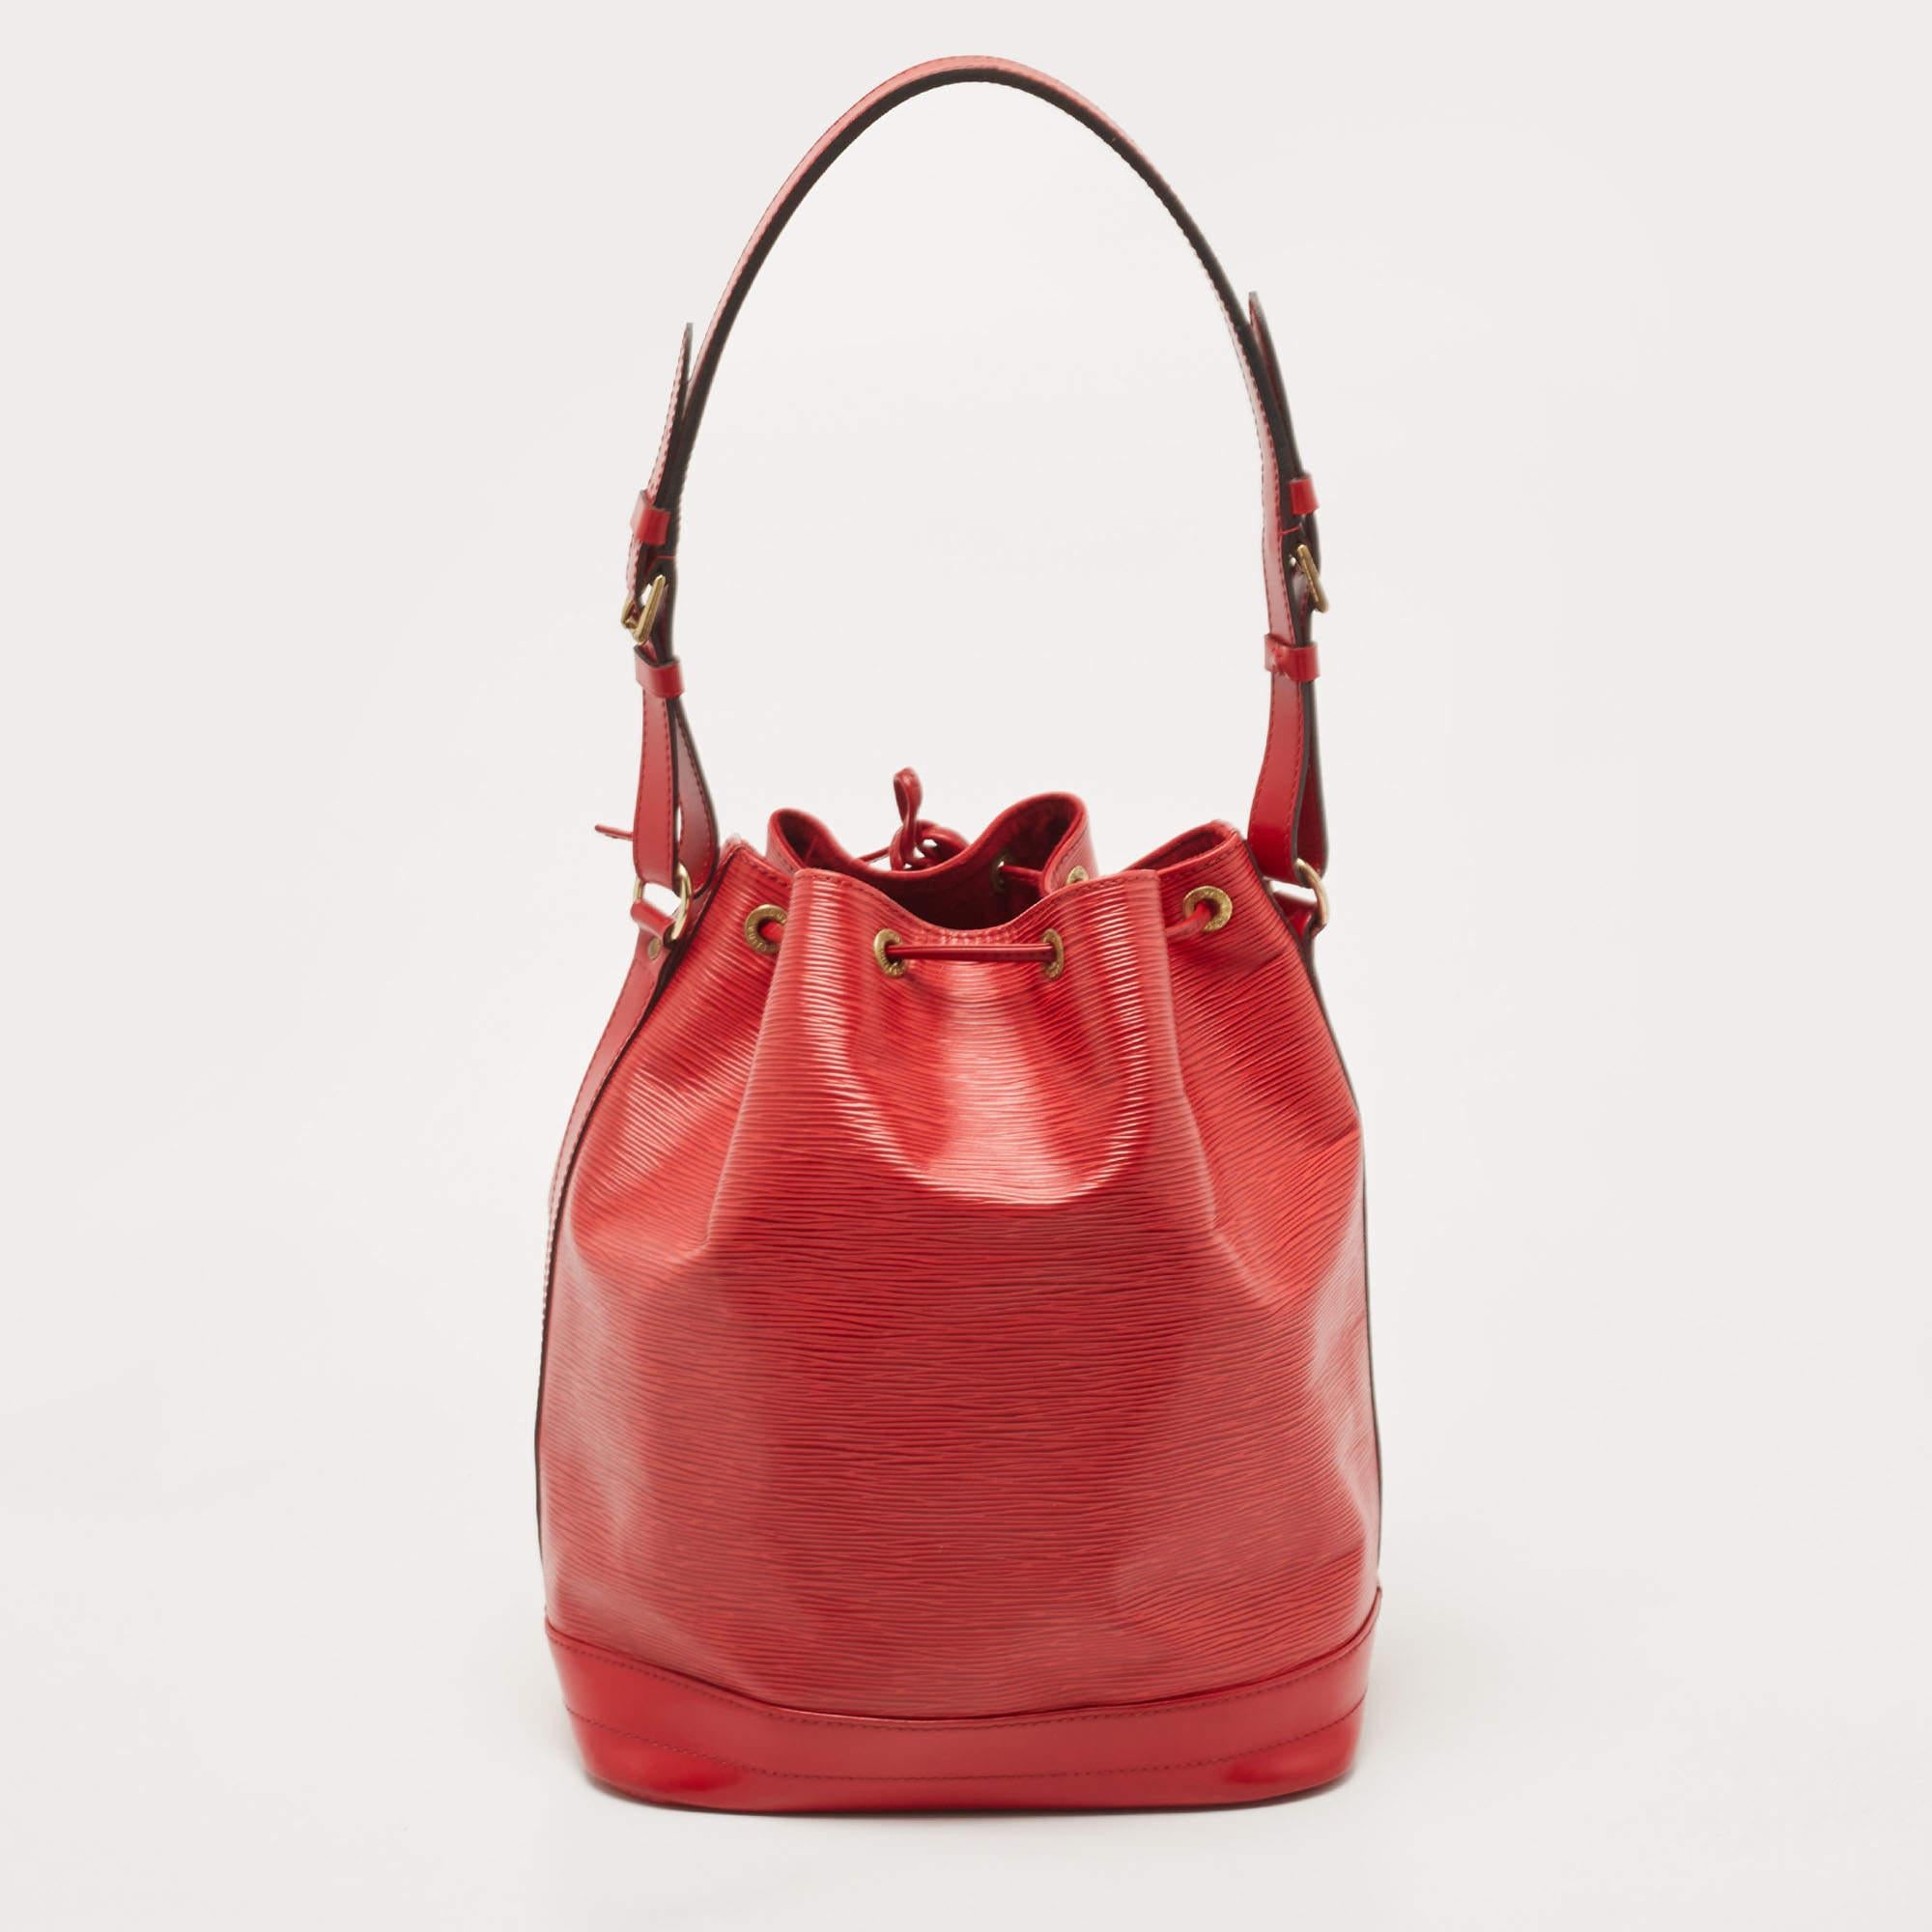 Created in 1932 by Louis Vuitton to carry bottles of Champagne, the iconic Noe now serves as a stylish daytime handbag. Crafted from red Epi leather, the bag exudes just the right amount of sophistication. It has a single adjustable strap, gold-tone